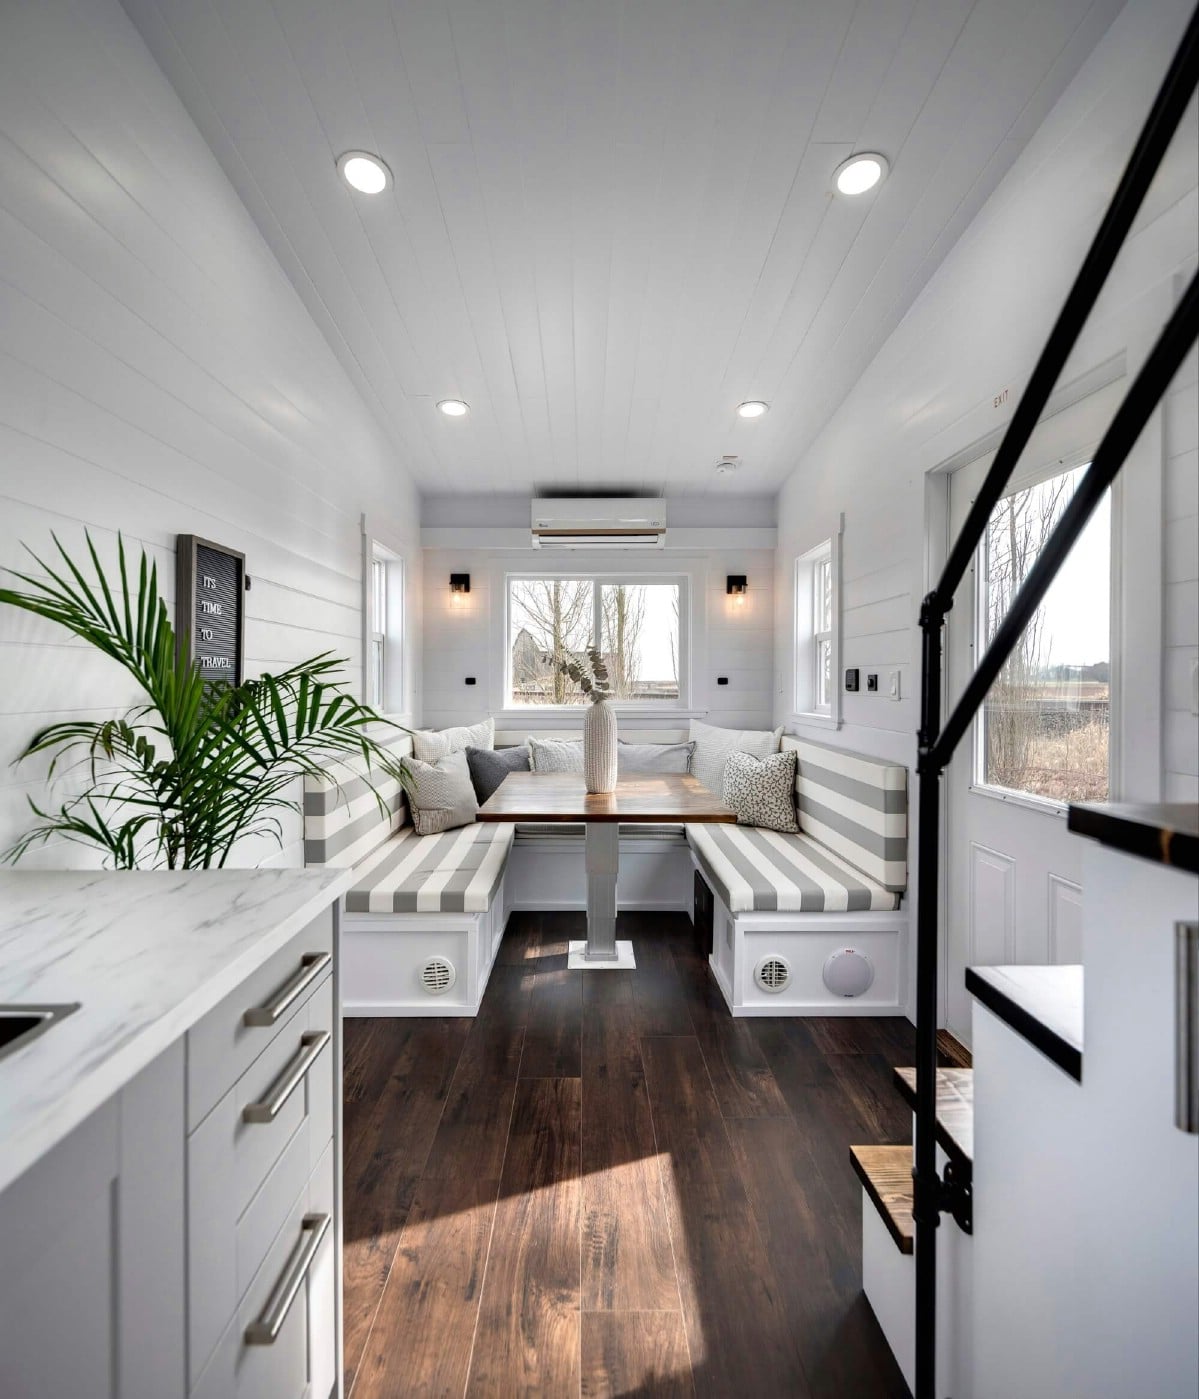 View into living area of tiny home from behind stairs